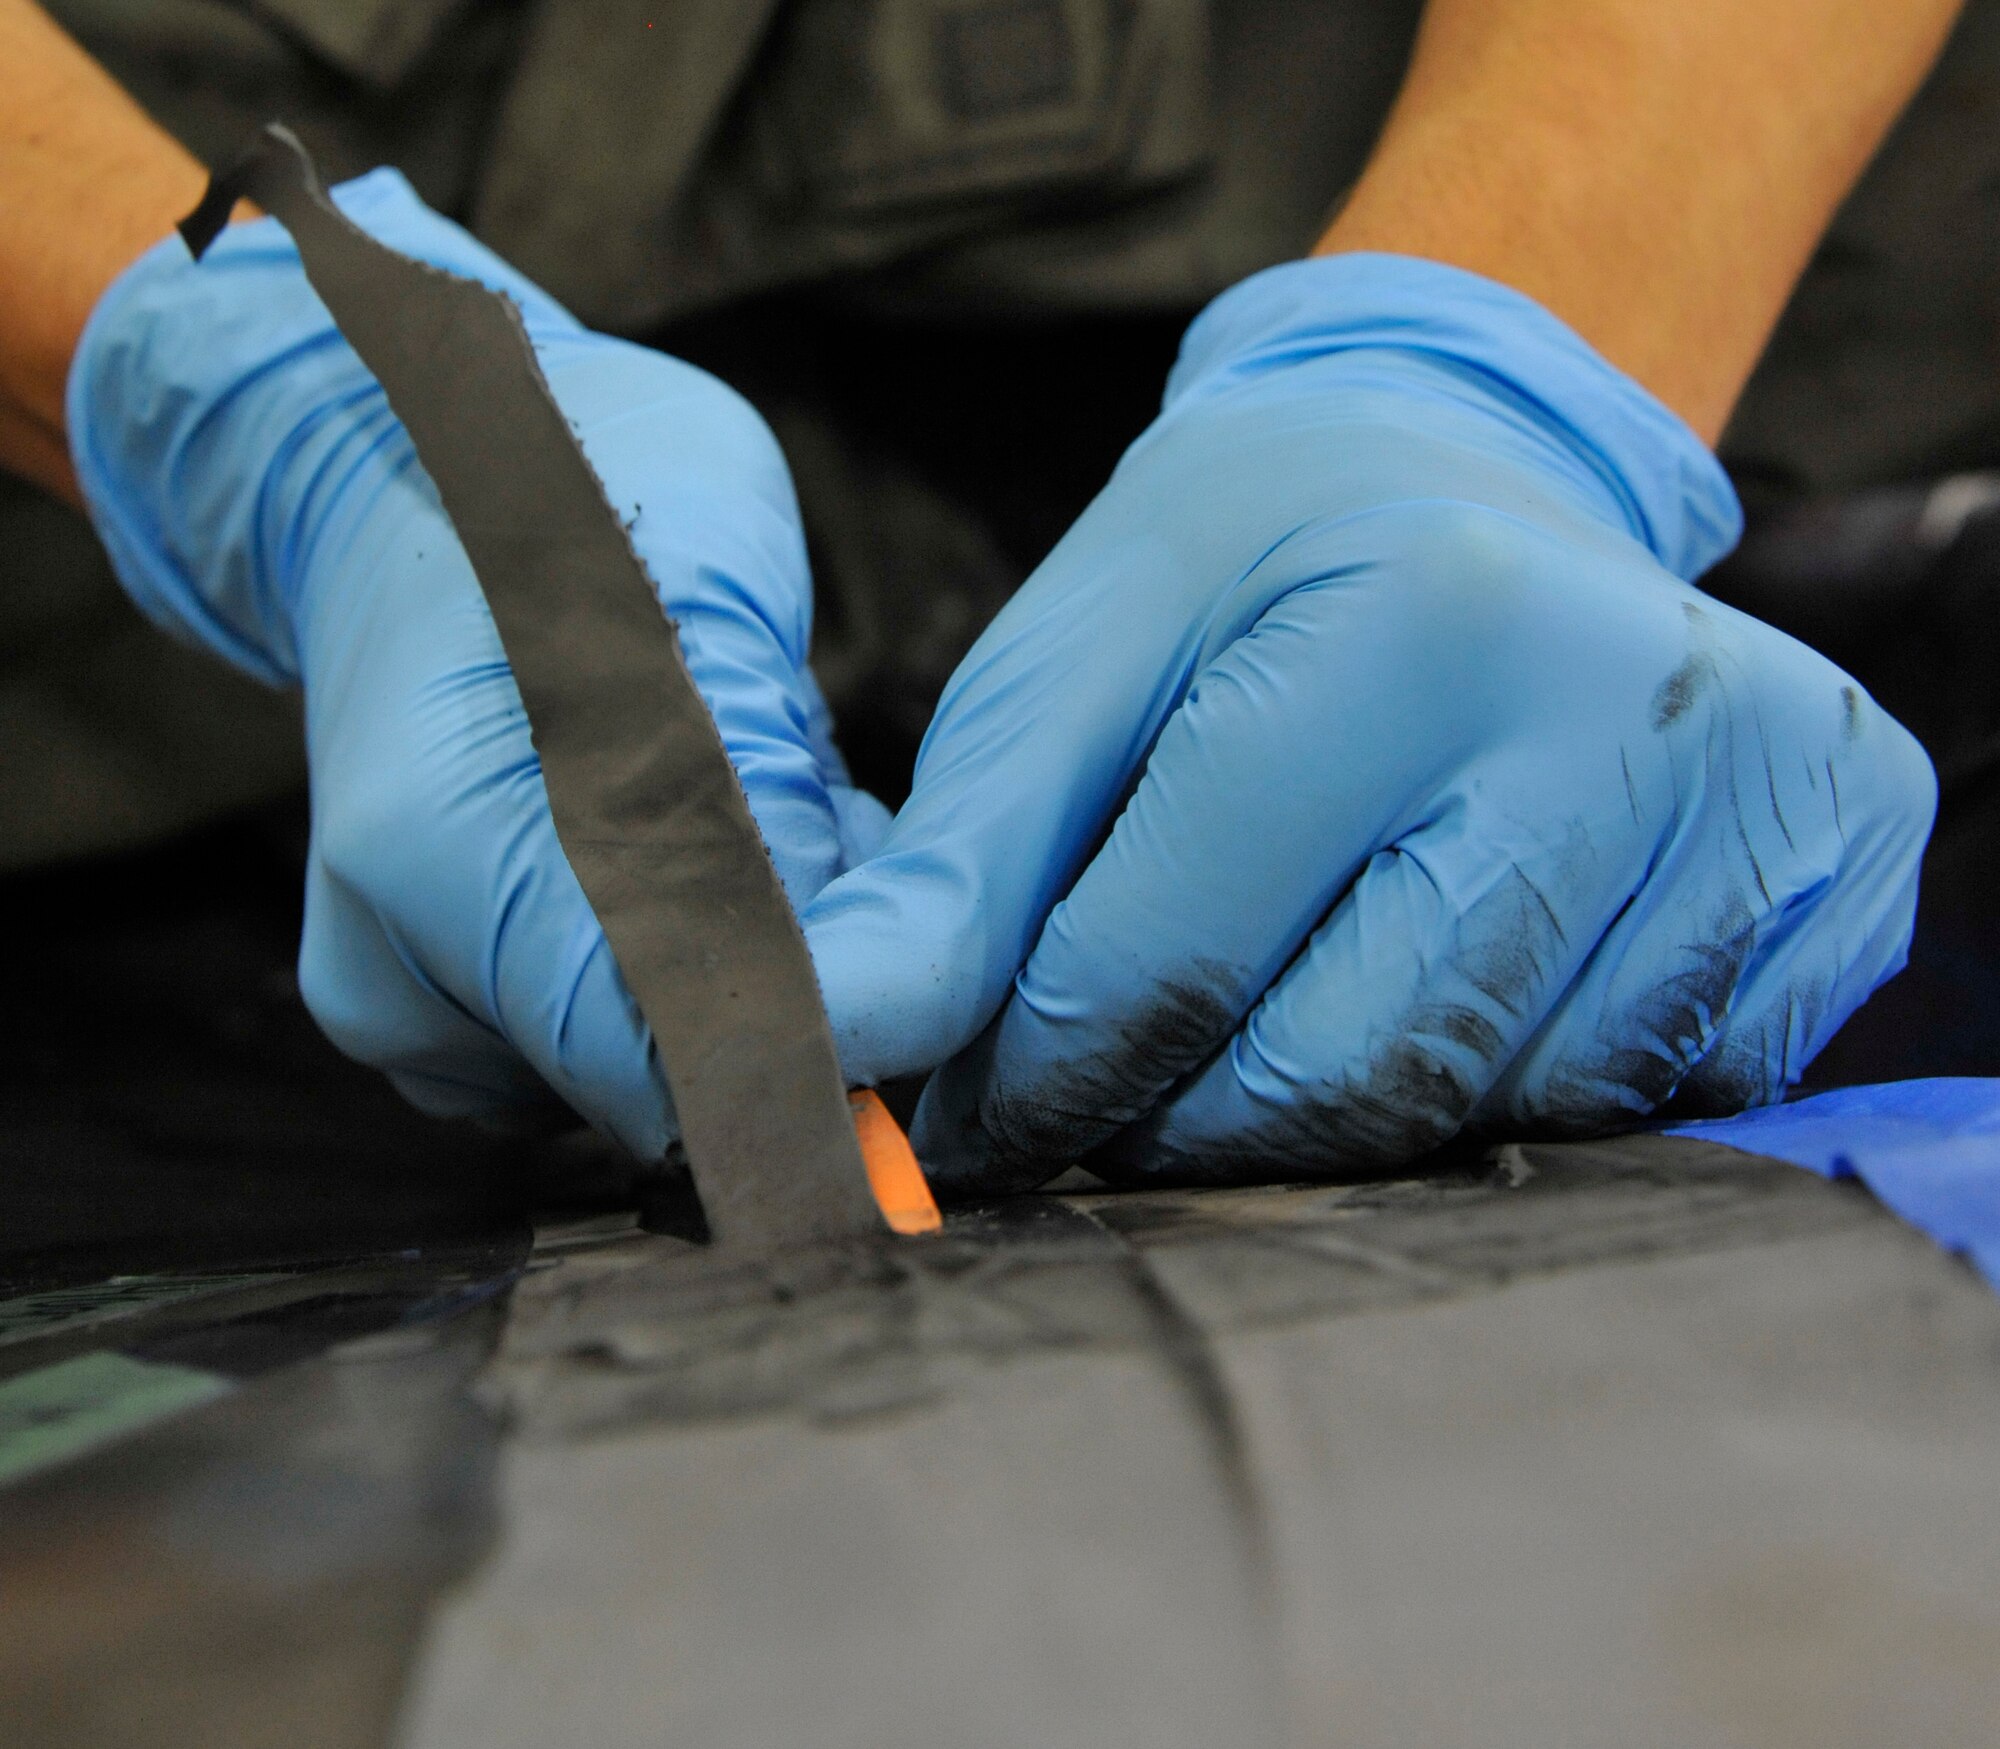 Senior Airman Alexander Ramirez, 509th MXS Low Observable aircraft structural maintainer, removes iron filled elastomer from the B-2 Spirit’s exhaust at Whiteman Air Force Base, Mo., June 12, 2014. The IFE must be removed due to excessive damage from flight. (U.S. Air Force photo by Airman 1st Class Keenan Berry/Released)